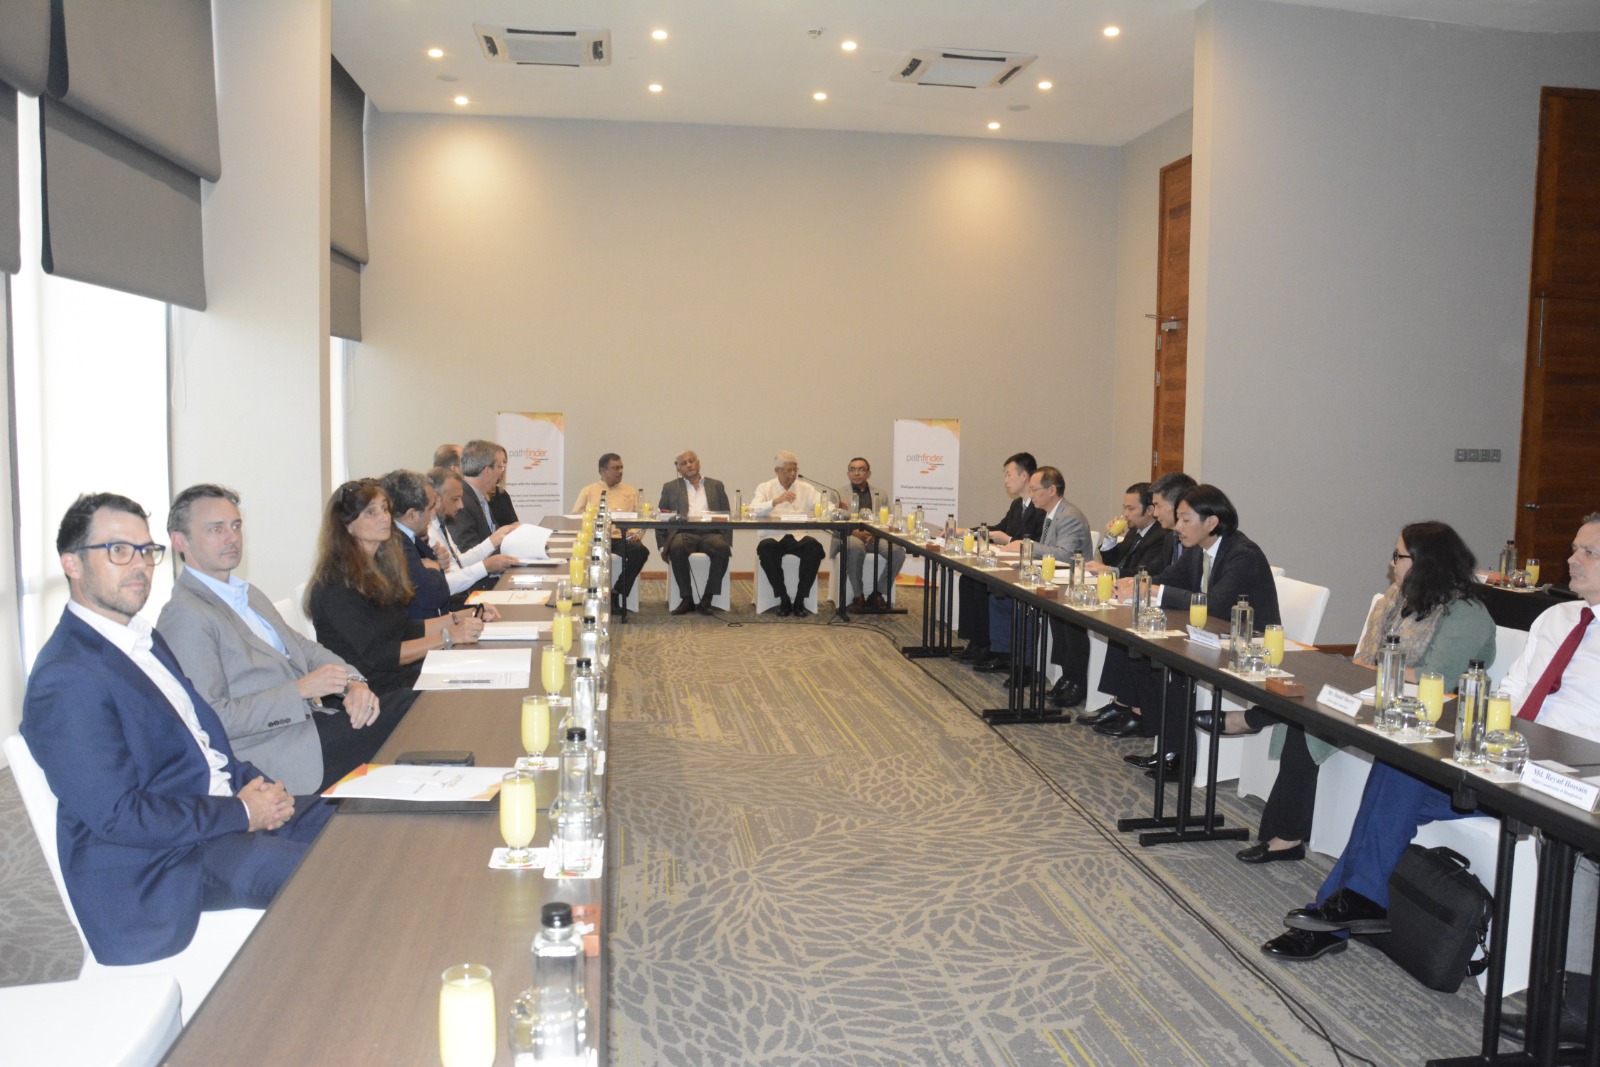 Pathfinder Foundation Holds “DIALOGUE WITH THE DIPLOMATIC CORPS”